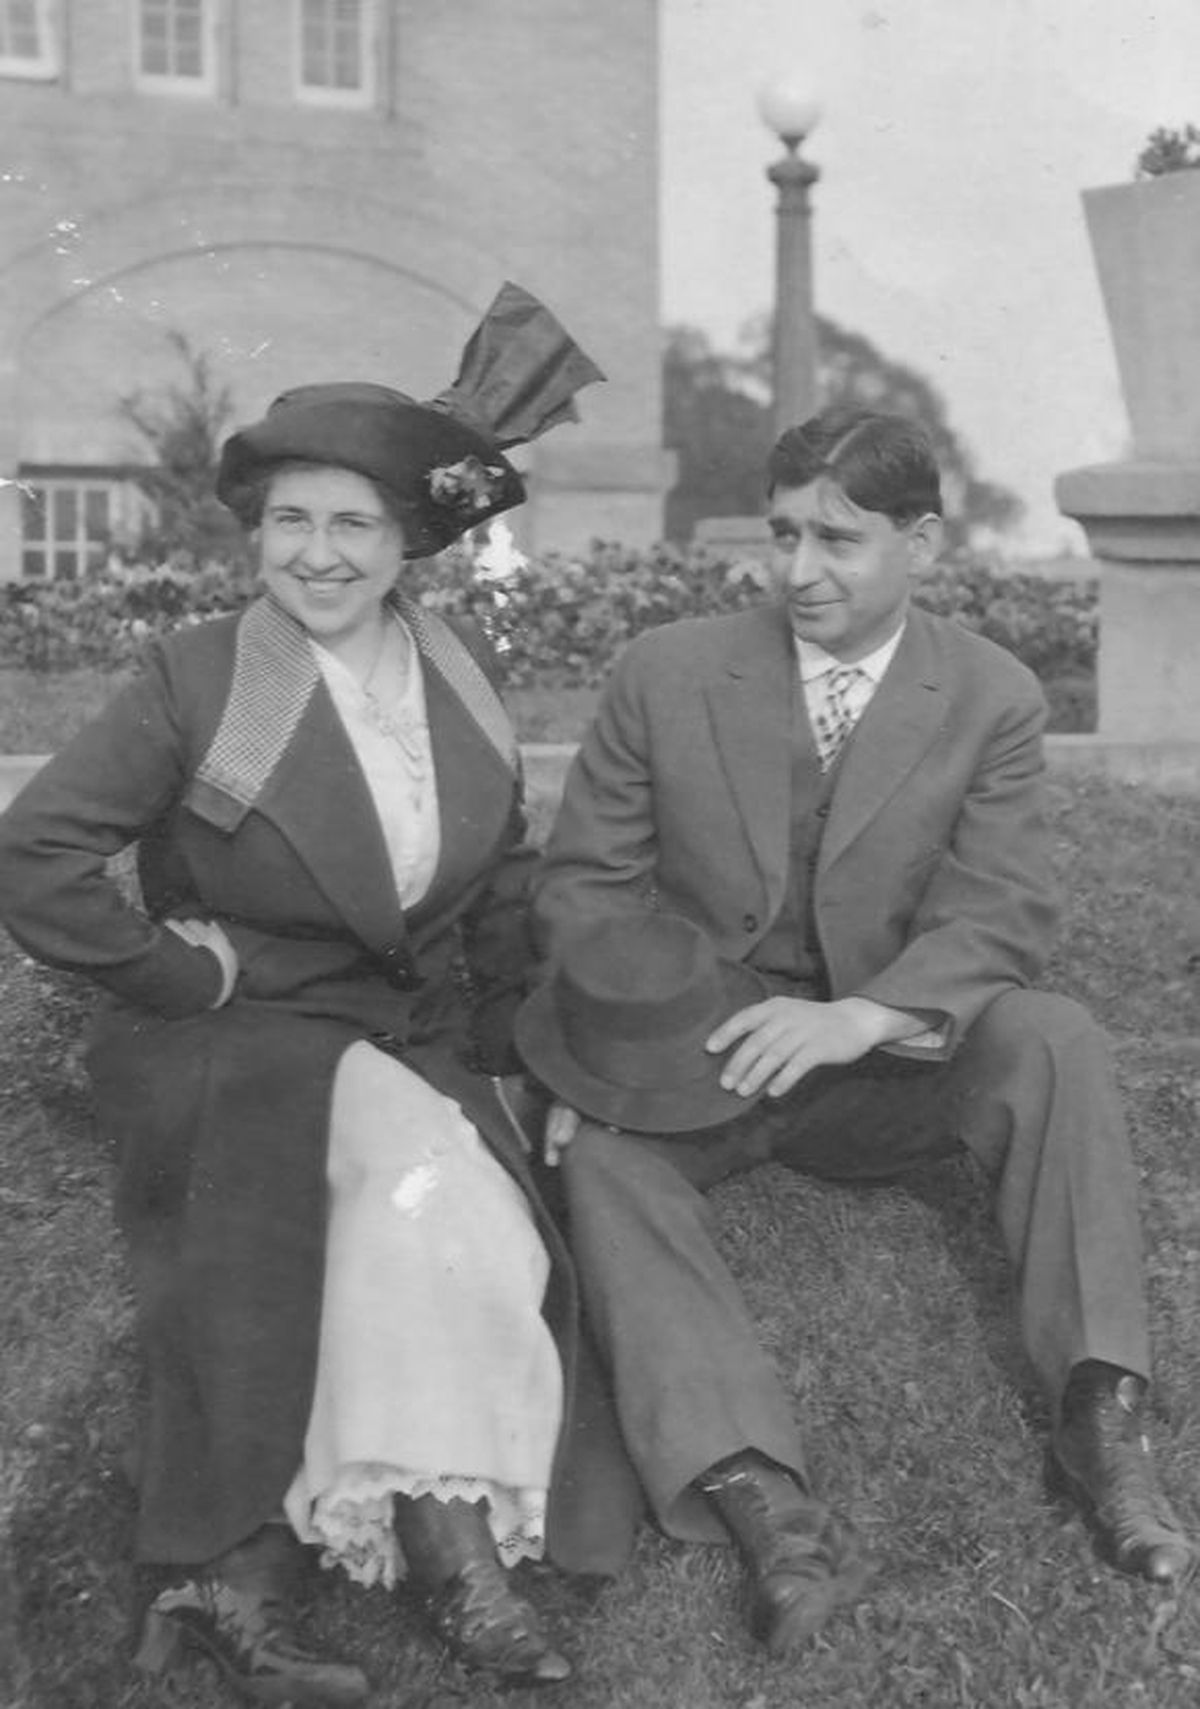 Mary (Zimmerman) Yeager, with her husband, Alois Yeager in 1914 in Toledo, Ohio. Yeager’s cookbook includes a recipe for suet pudding. (Courtesy of Jonathan Brunt)